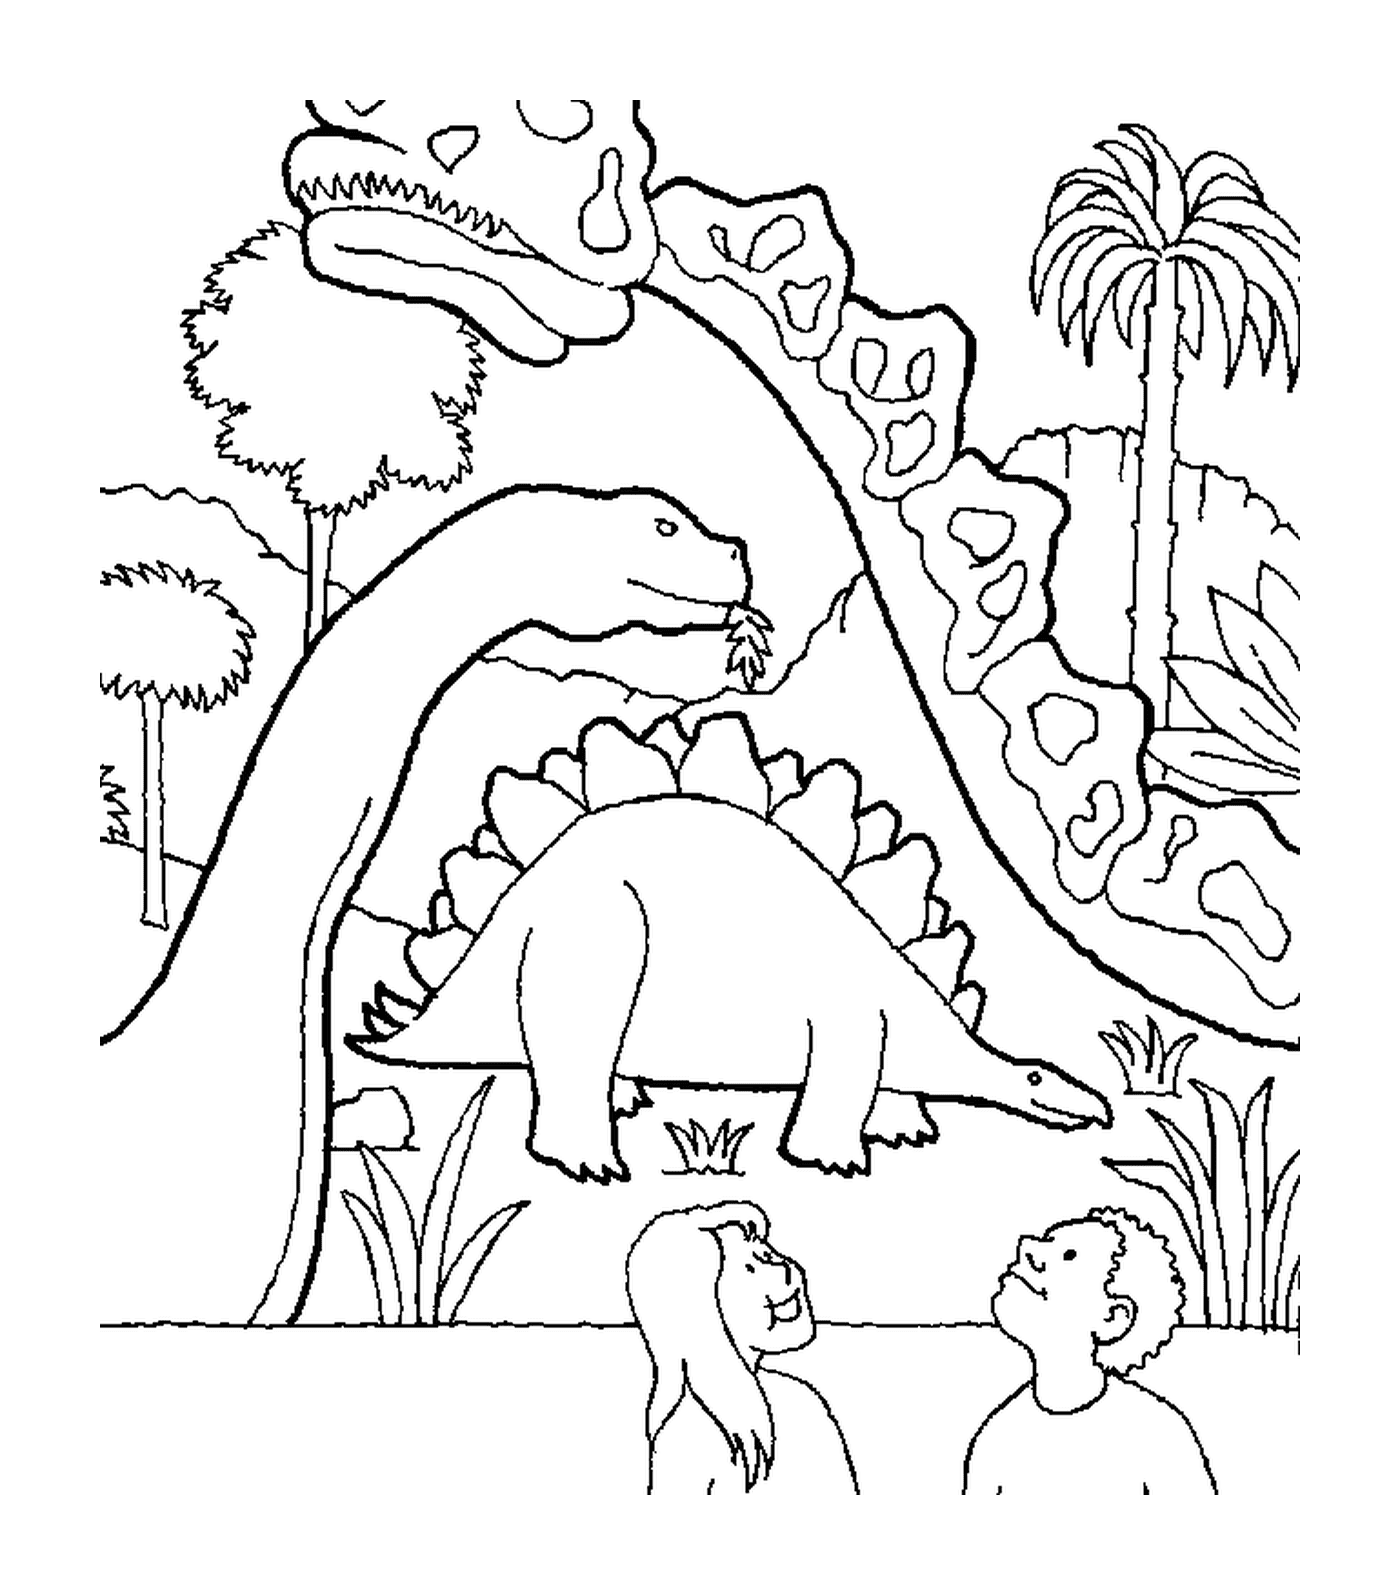  Dinosaur surrounded by two other dinosaurs 